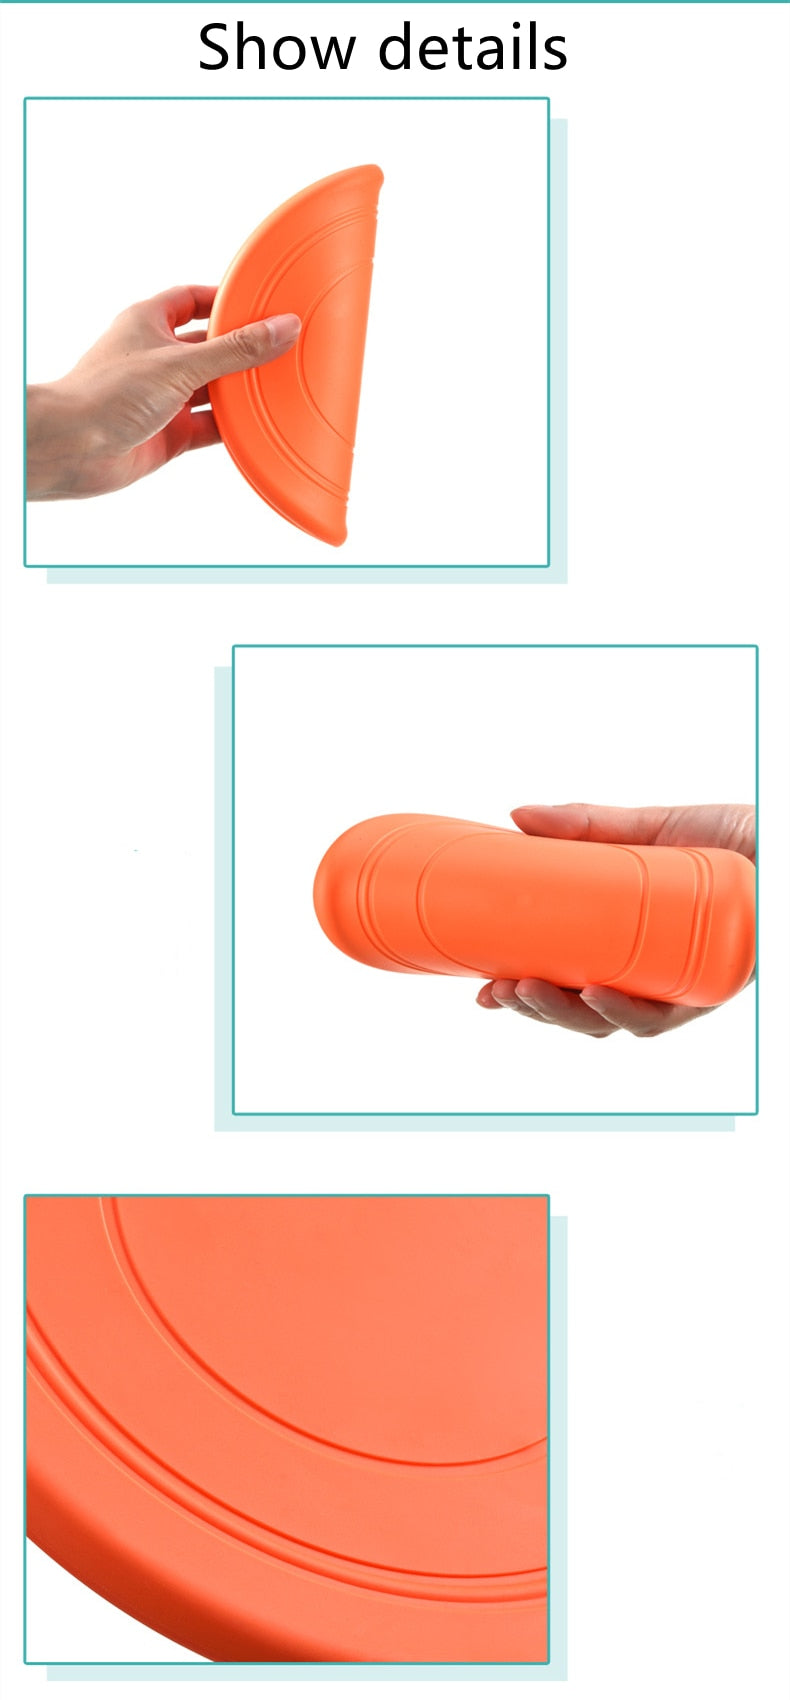 Interactive Dog Frisbee Toy - Non-Slip Silicone for Training and Fun